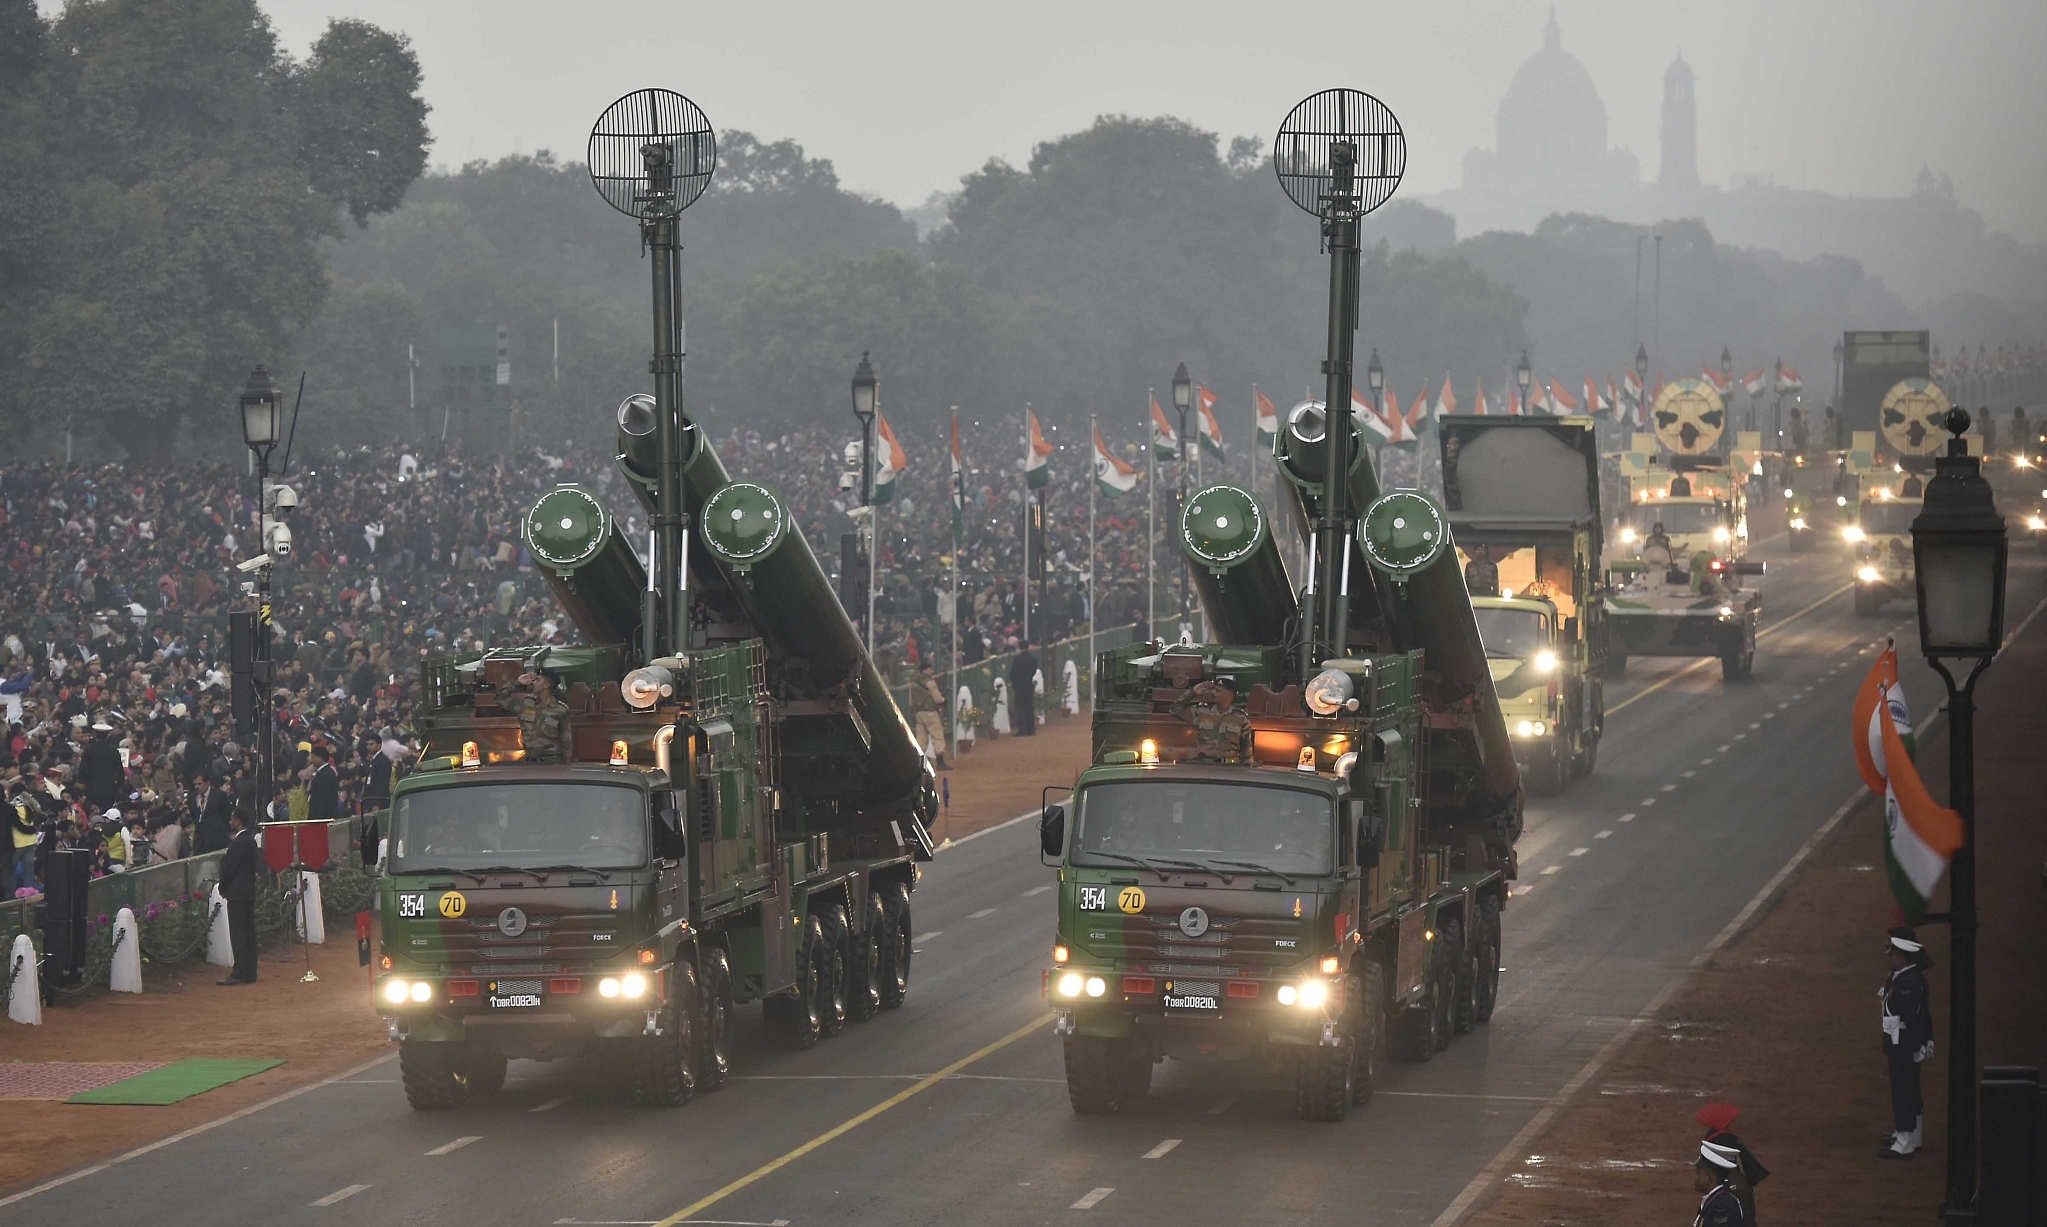 Brahmos Weapon System during the celebration of the 68th Republic Day. (Raj K Raj/Hindustan Times via Getty Images) - Representative Image